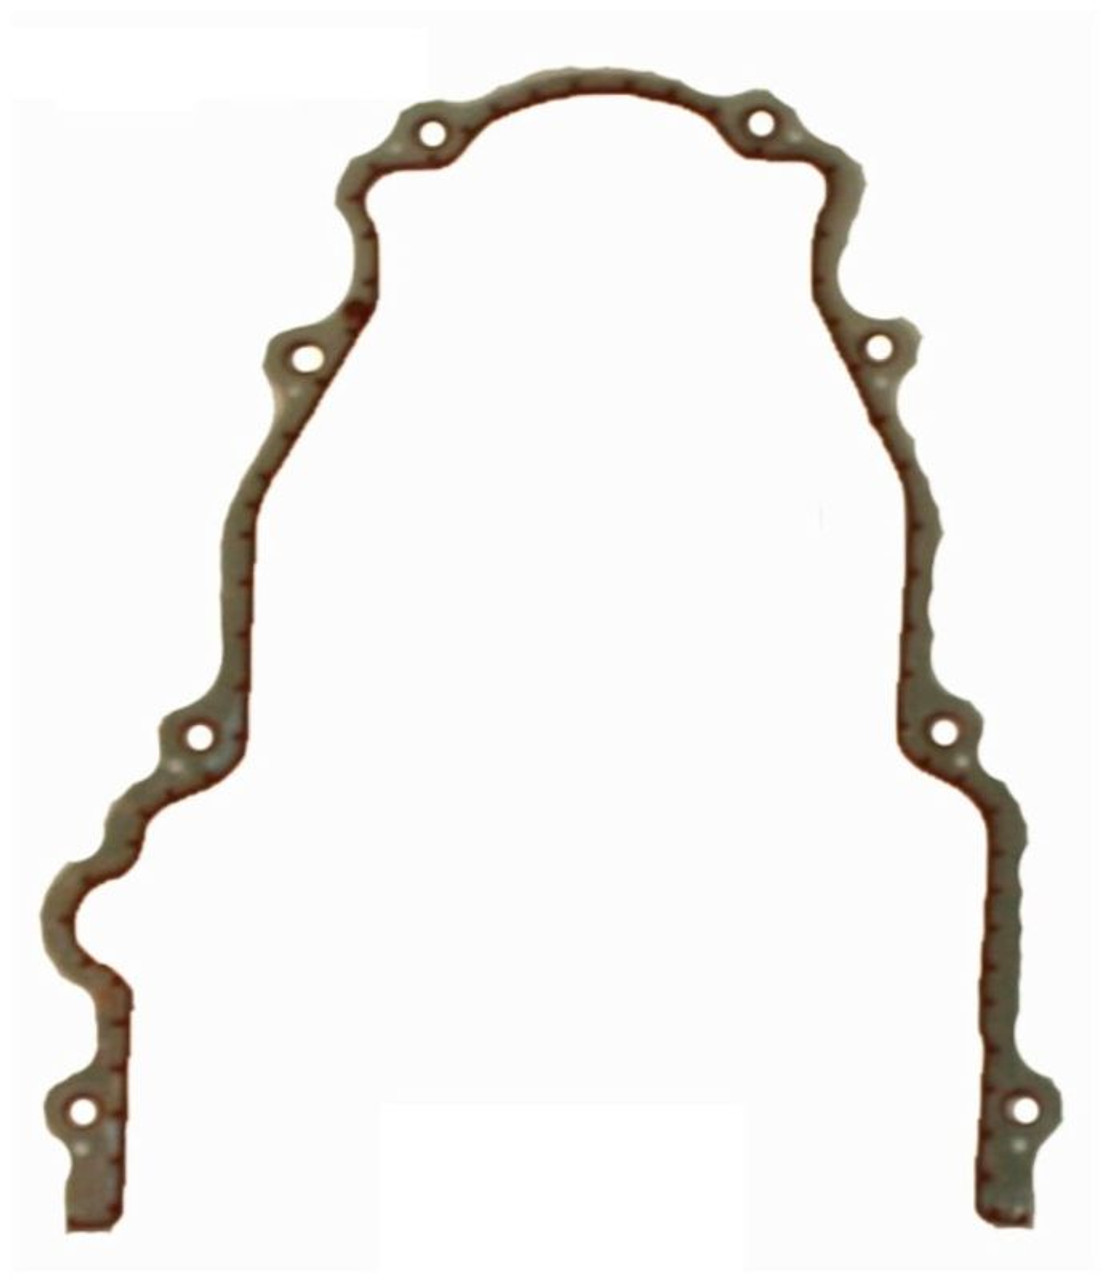 2010 Chevrolet Express 1500 5.3L Engine Timing Cover Gasket TCG293-A -641